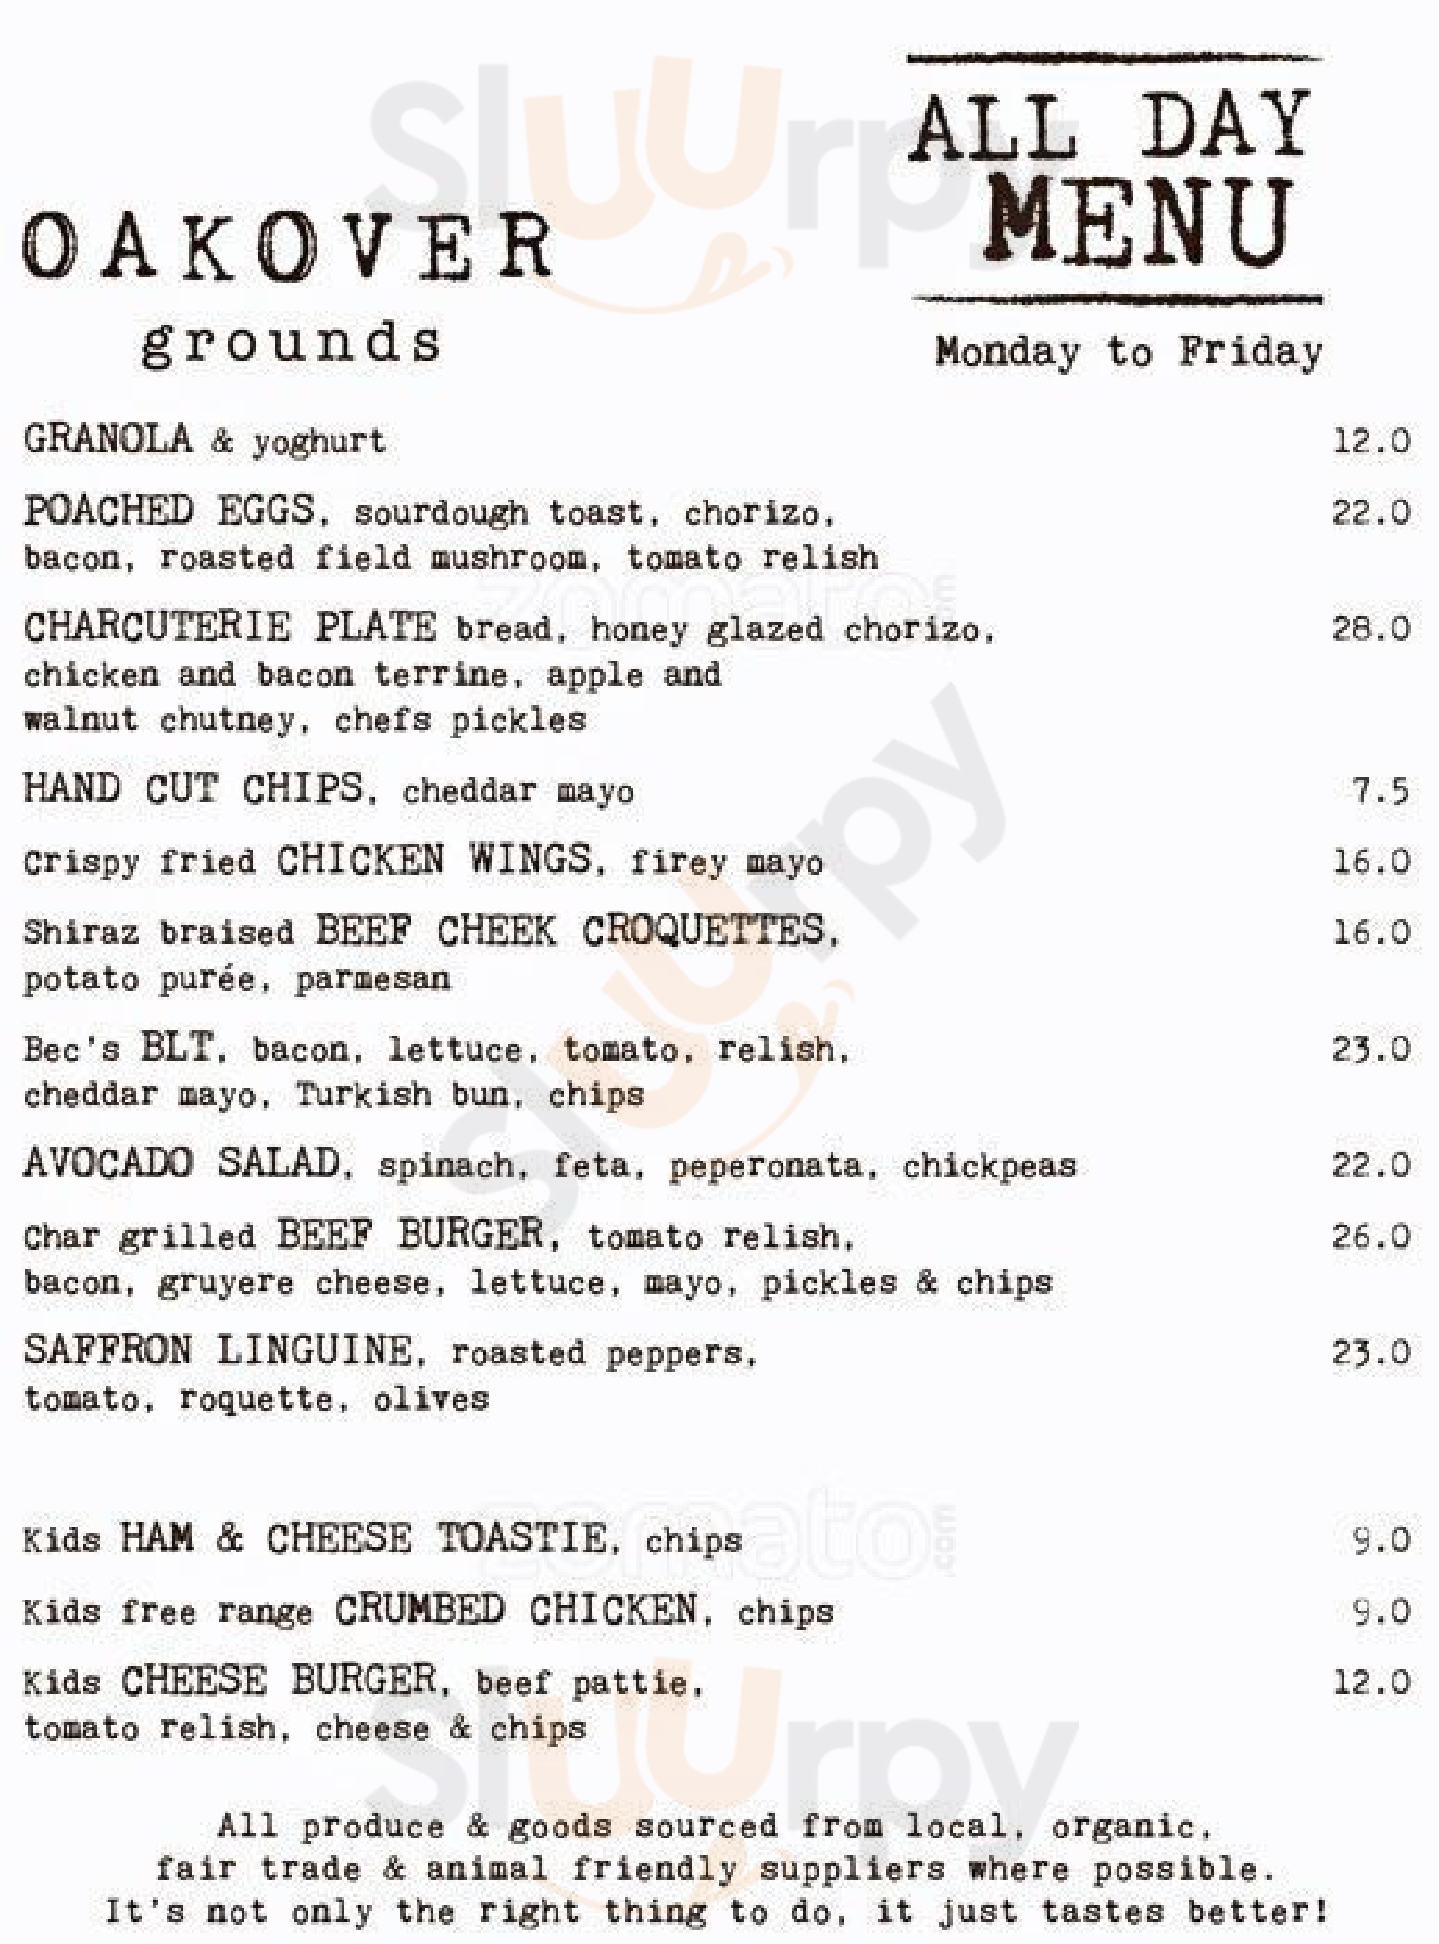 Oakover Grounds Middle Swan Menu - 1